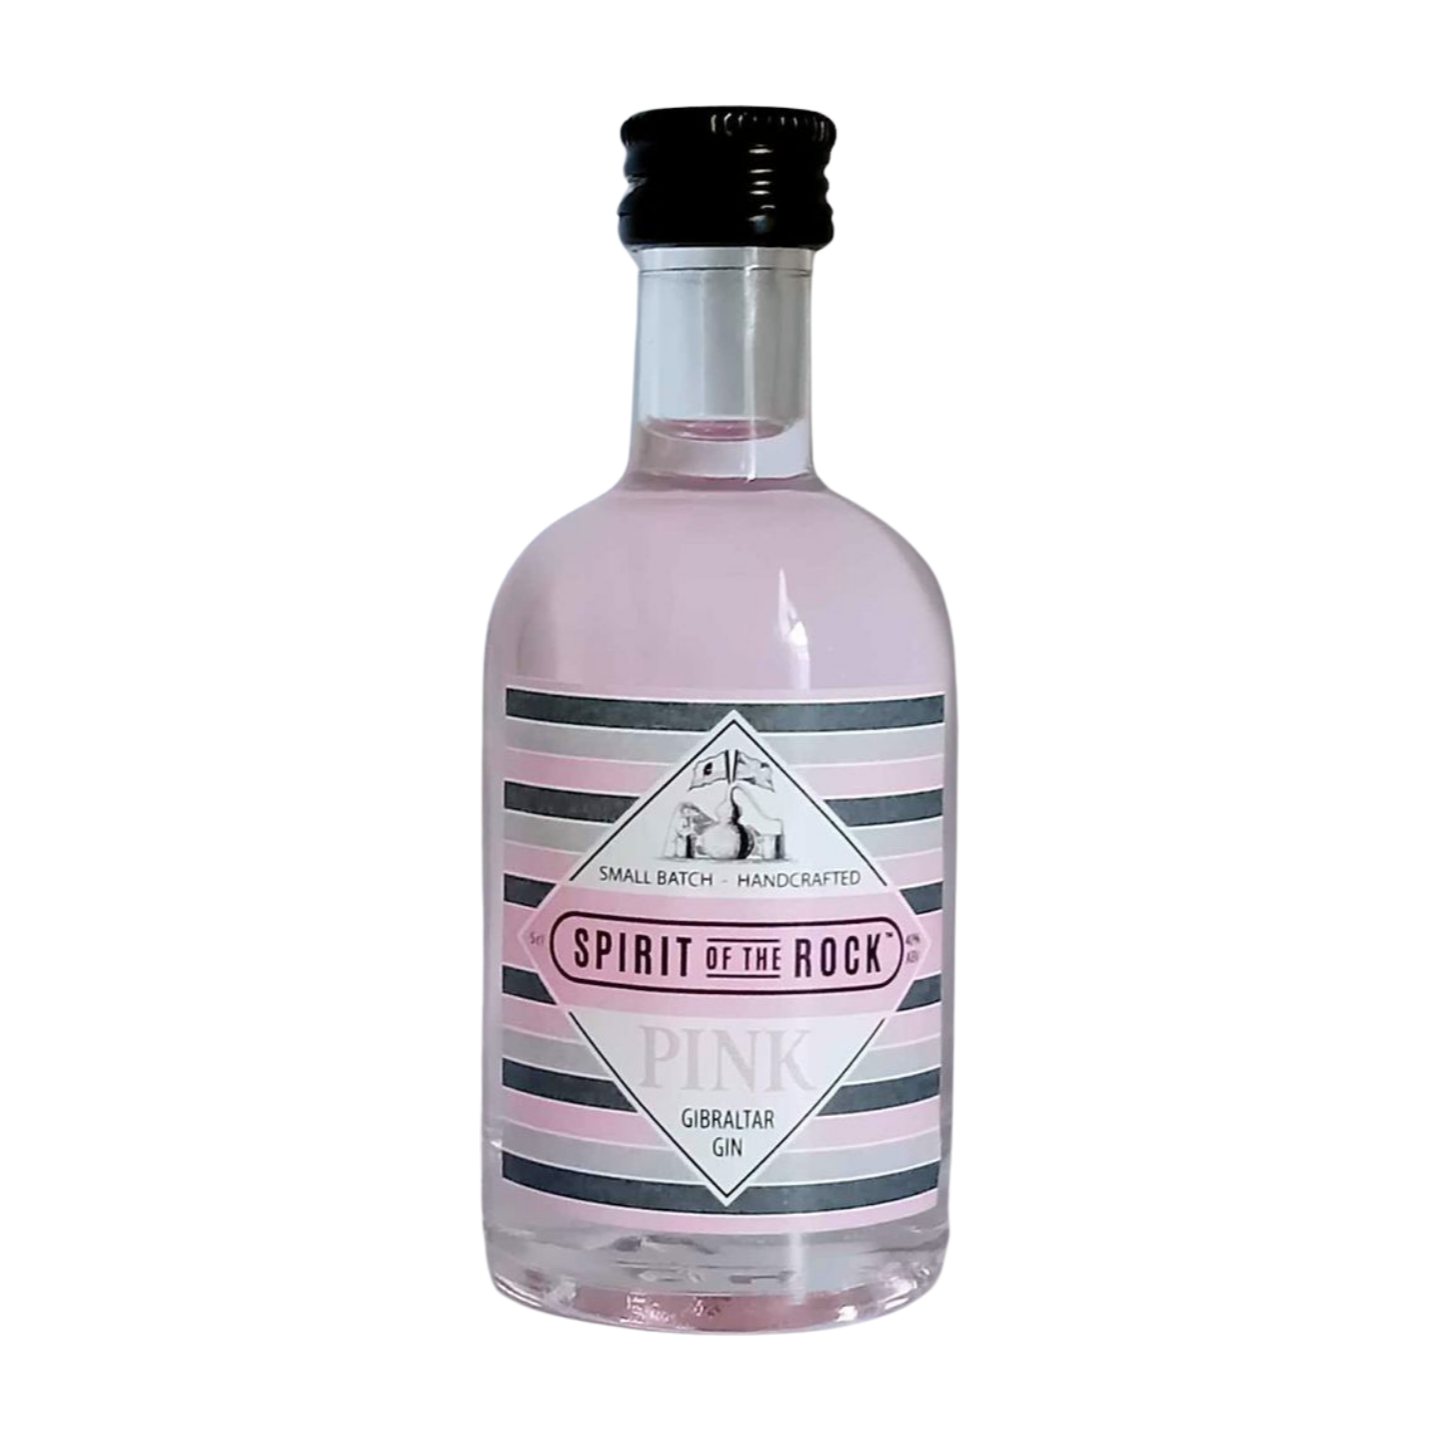 "A bottle of Spirit of the Pink Gin, a vibrant pink gin with floral and fruity notes."